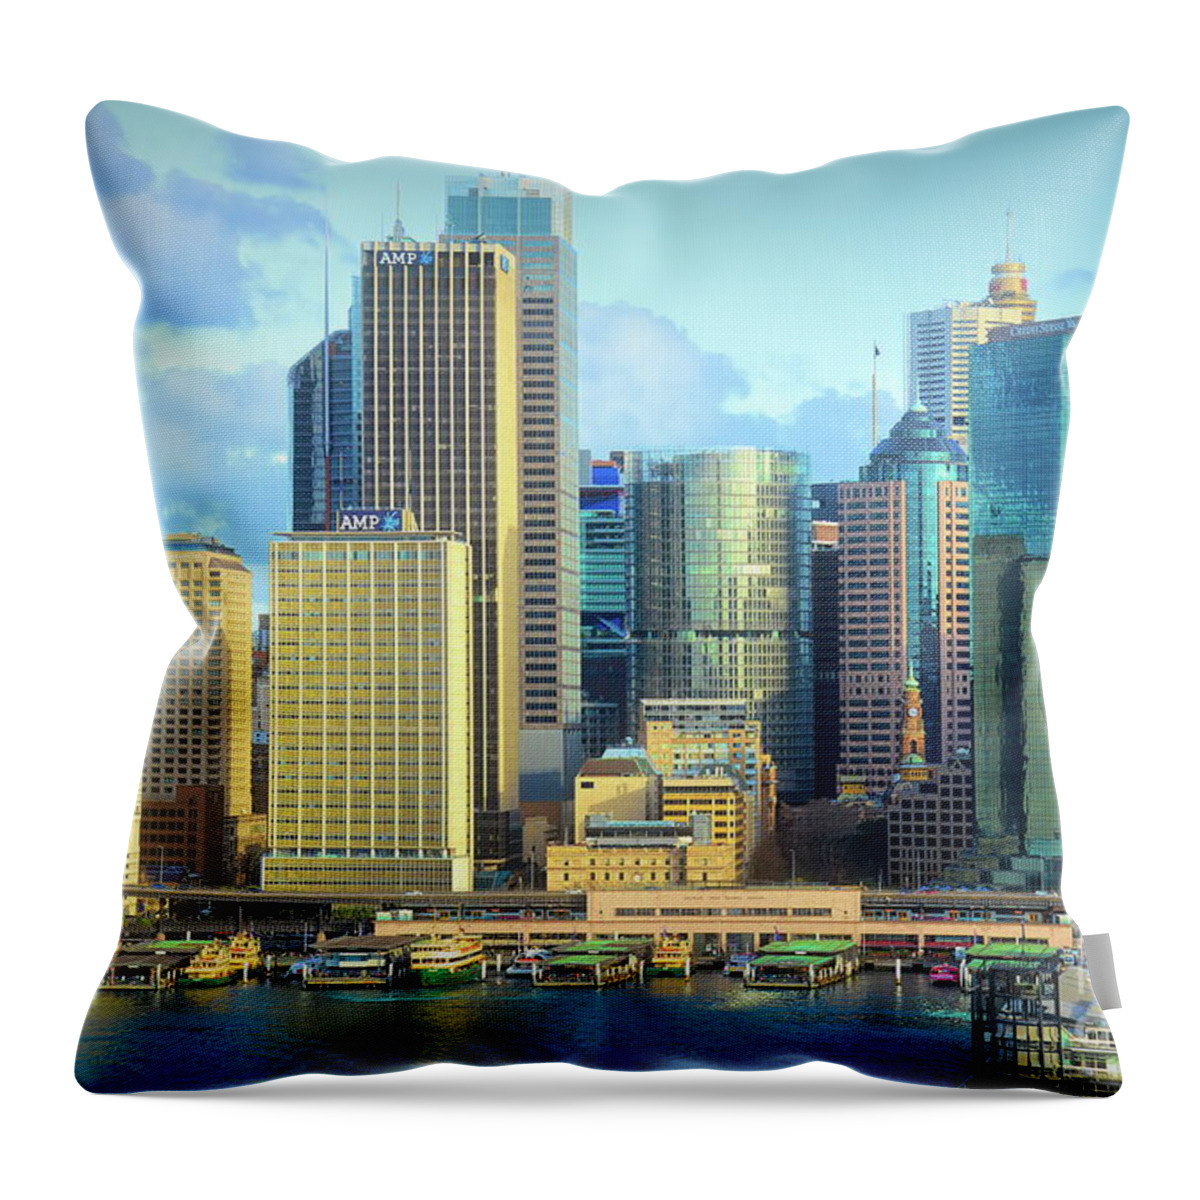 Cityscape Throw Pillow featuring the photograph Sydney Australia Cityscape by Diana Mary Sharpton